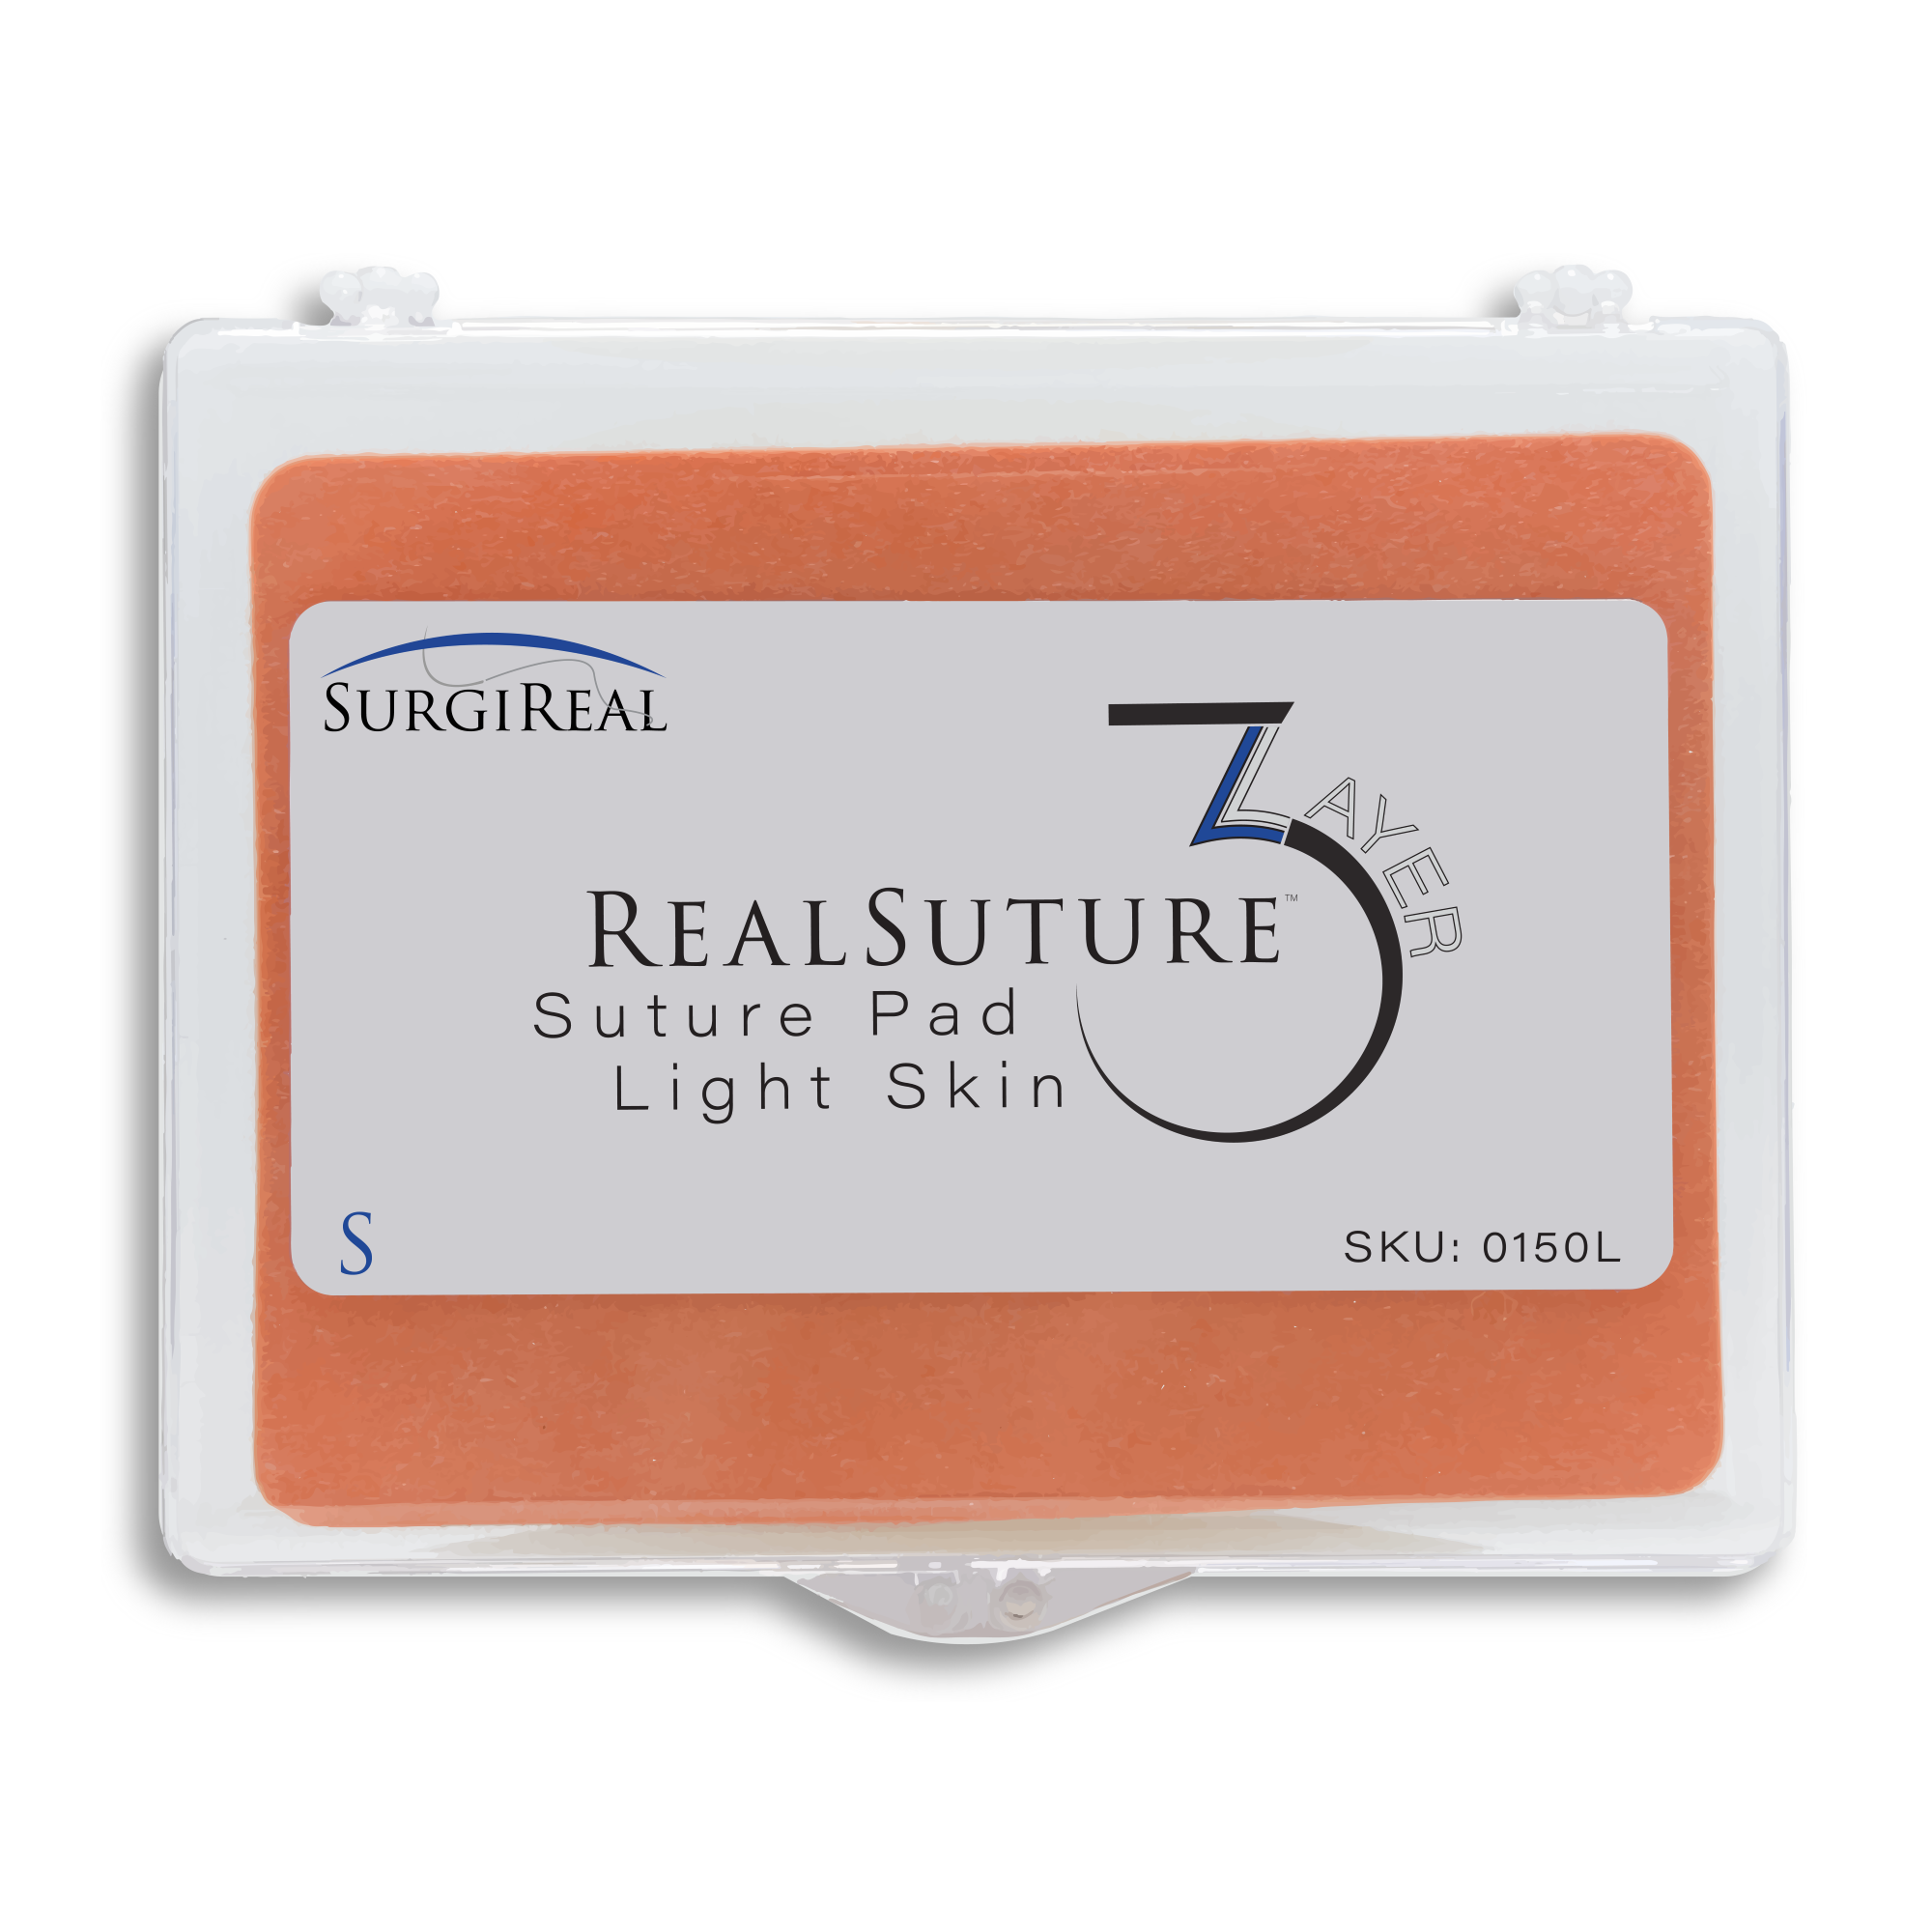 The 3-Layer Suture Pad from SurgiReal is designed to mimic the first three superficial layers of the abdominal wall; the Epidermis layer, Subcutaneous layer, and the first Fascia layer. 